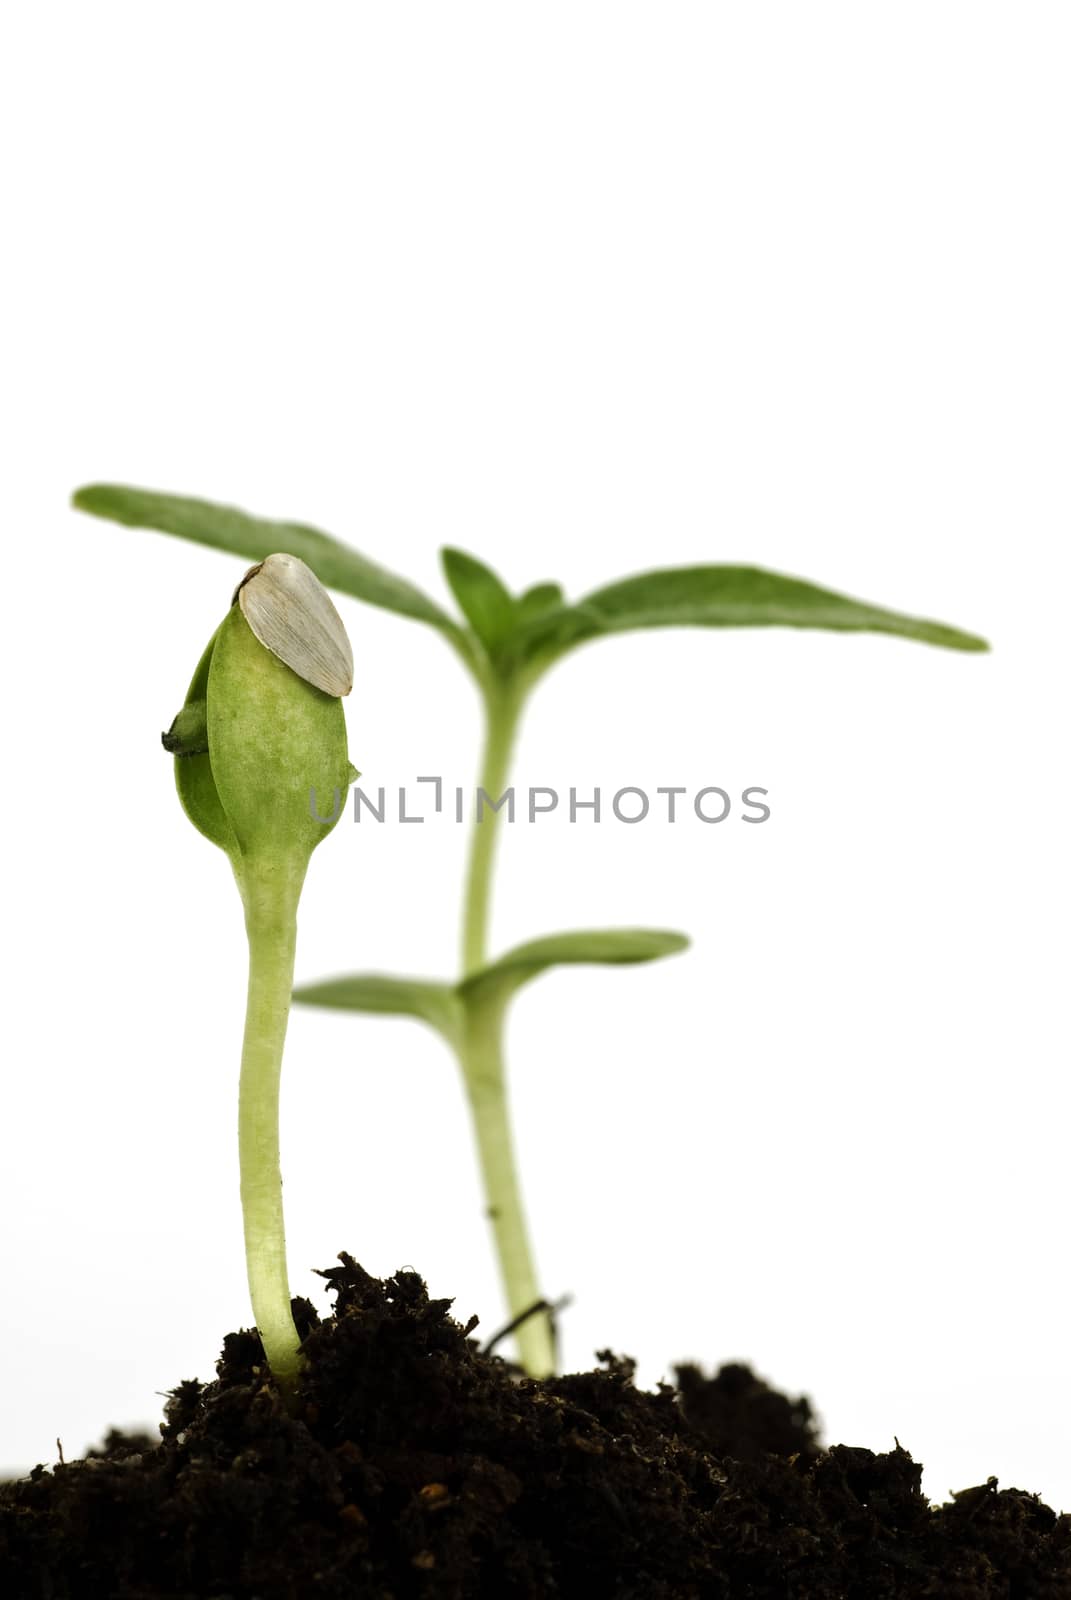 New Growth Seedling Isolated On White by stockbuster1